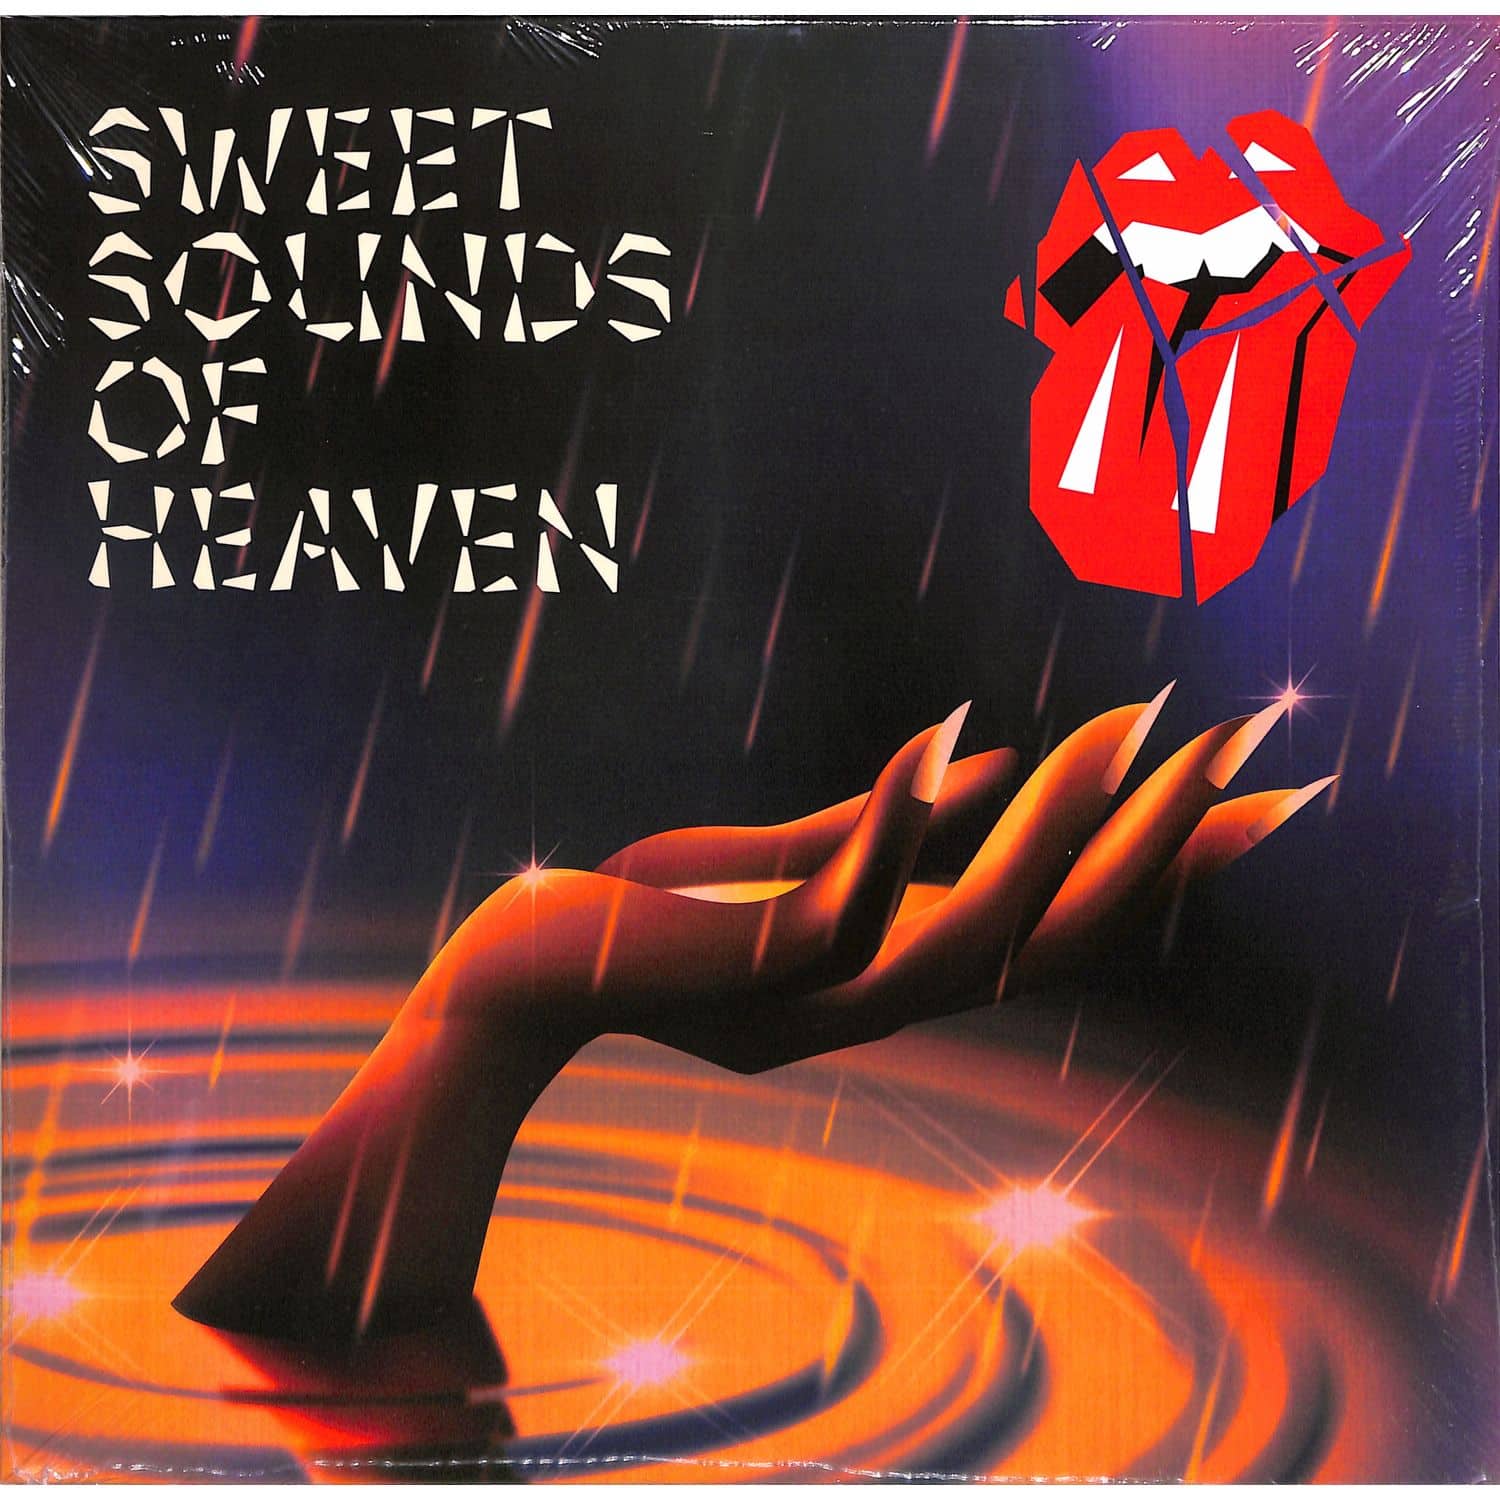 The Rolling Stones - SWEET SOUNDS OF HEAVEN 